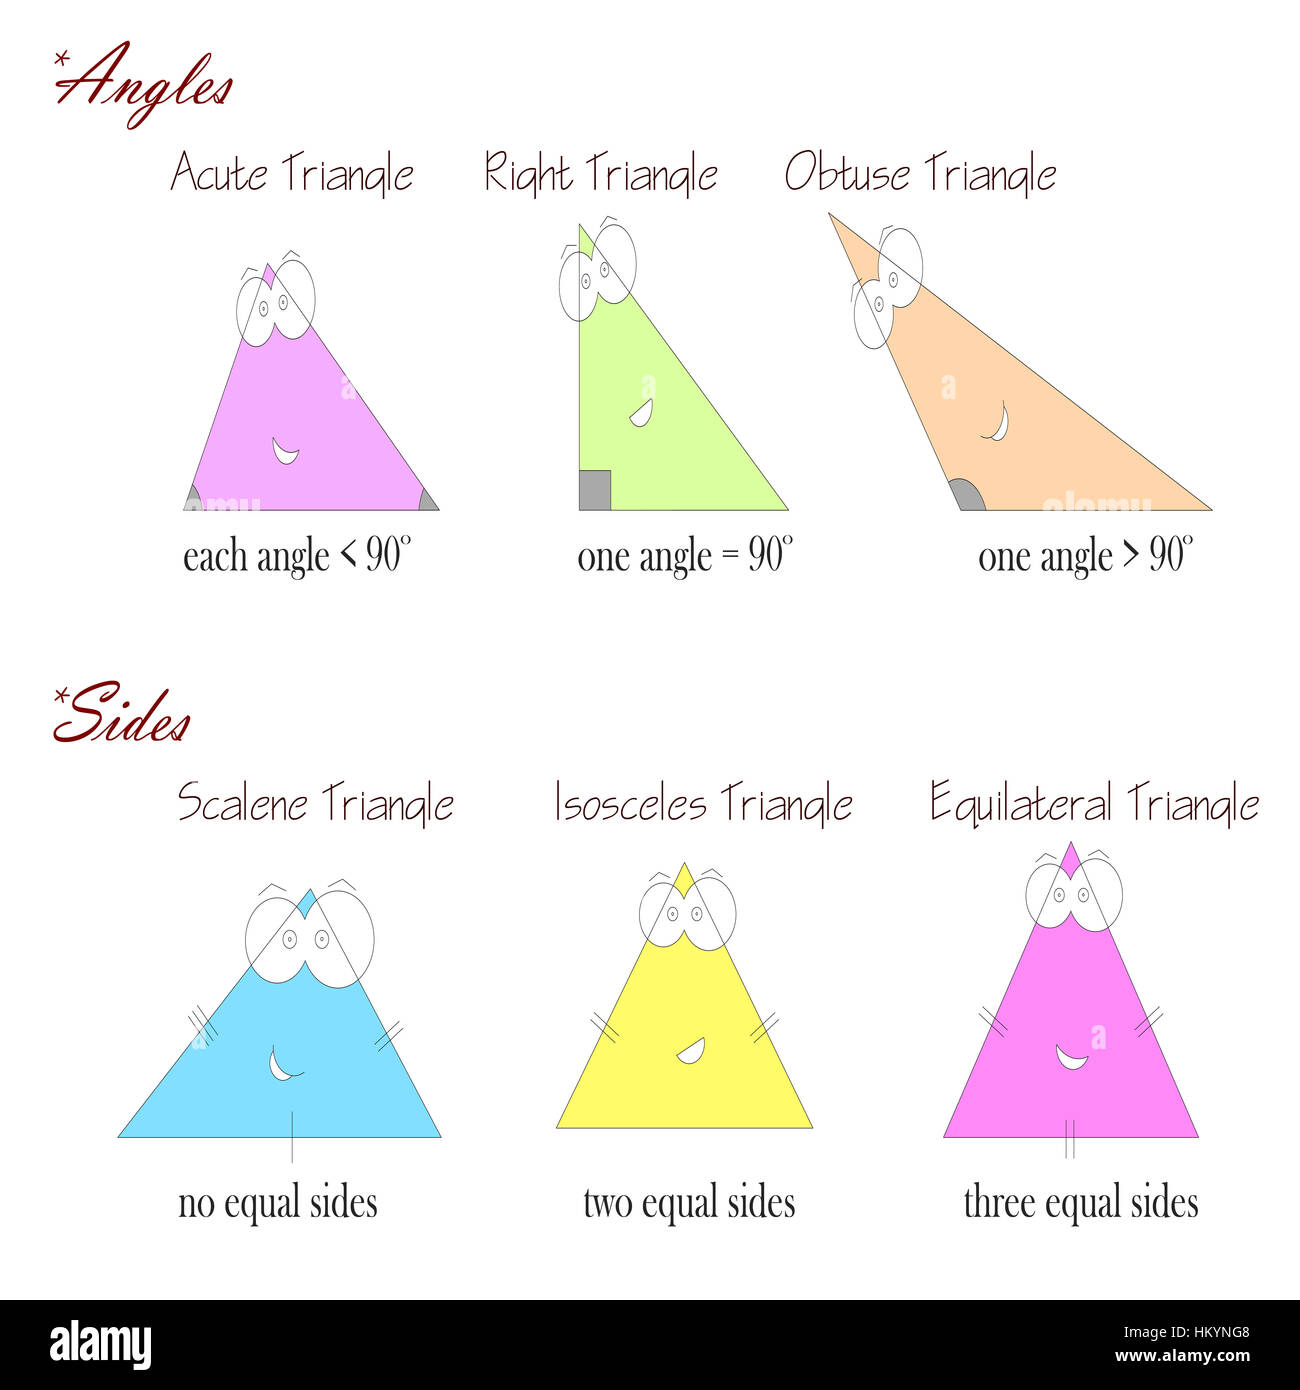 types of triangles based on angles and sides - geometry shapes for kids Stock Photo